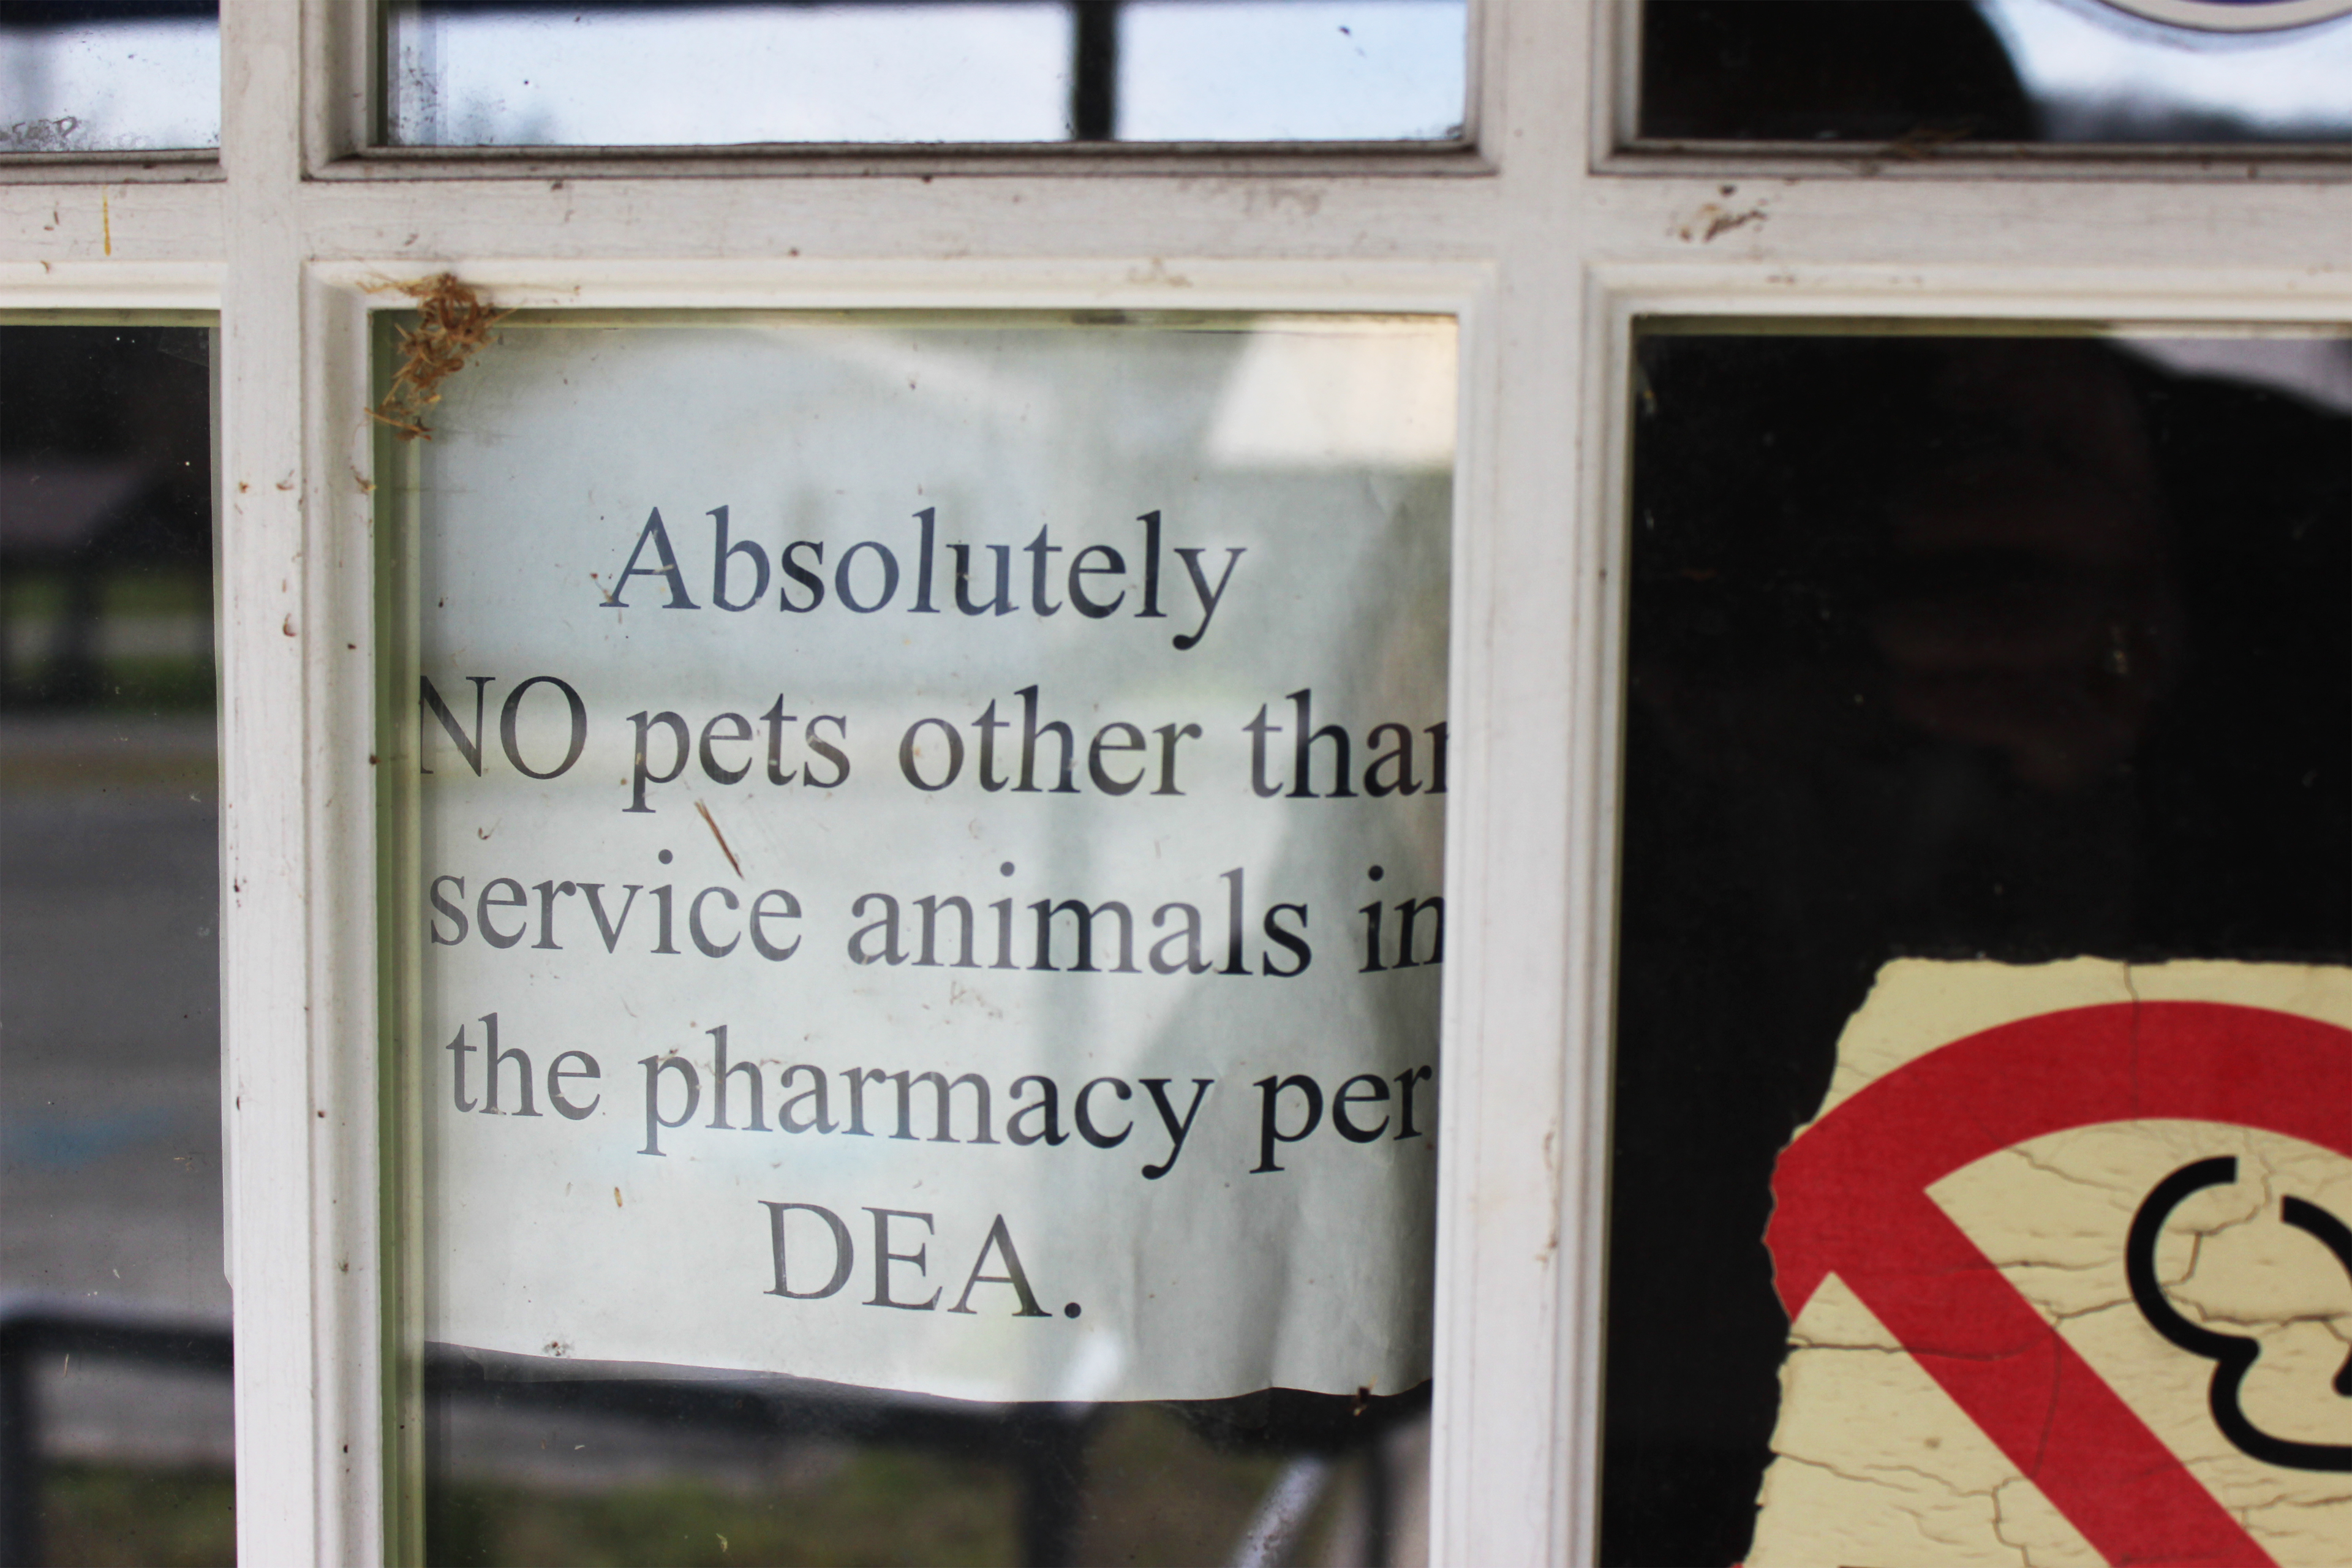 A closeup photo shows a sign on the door of Dale Hollow Policy that reads, "Absolutely no pets other than service animals in the pharmacy per DEA."